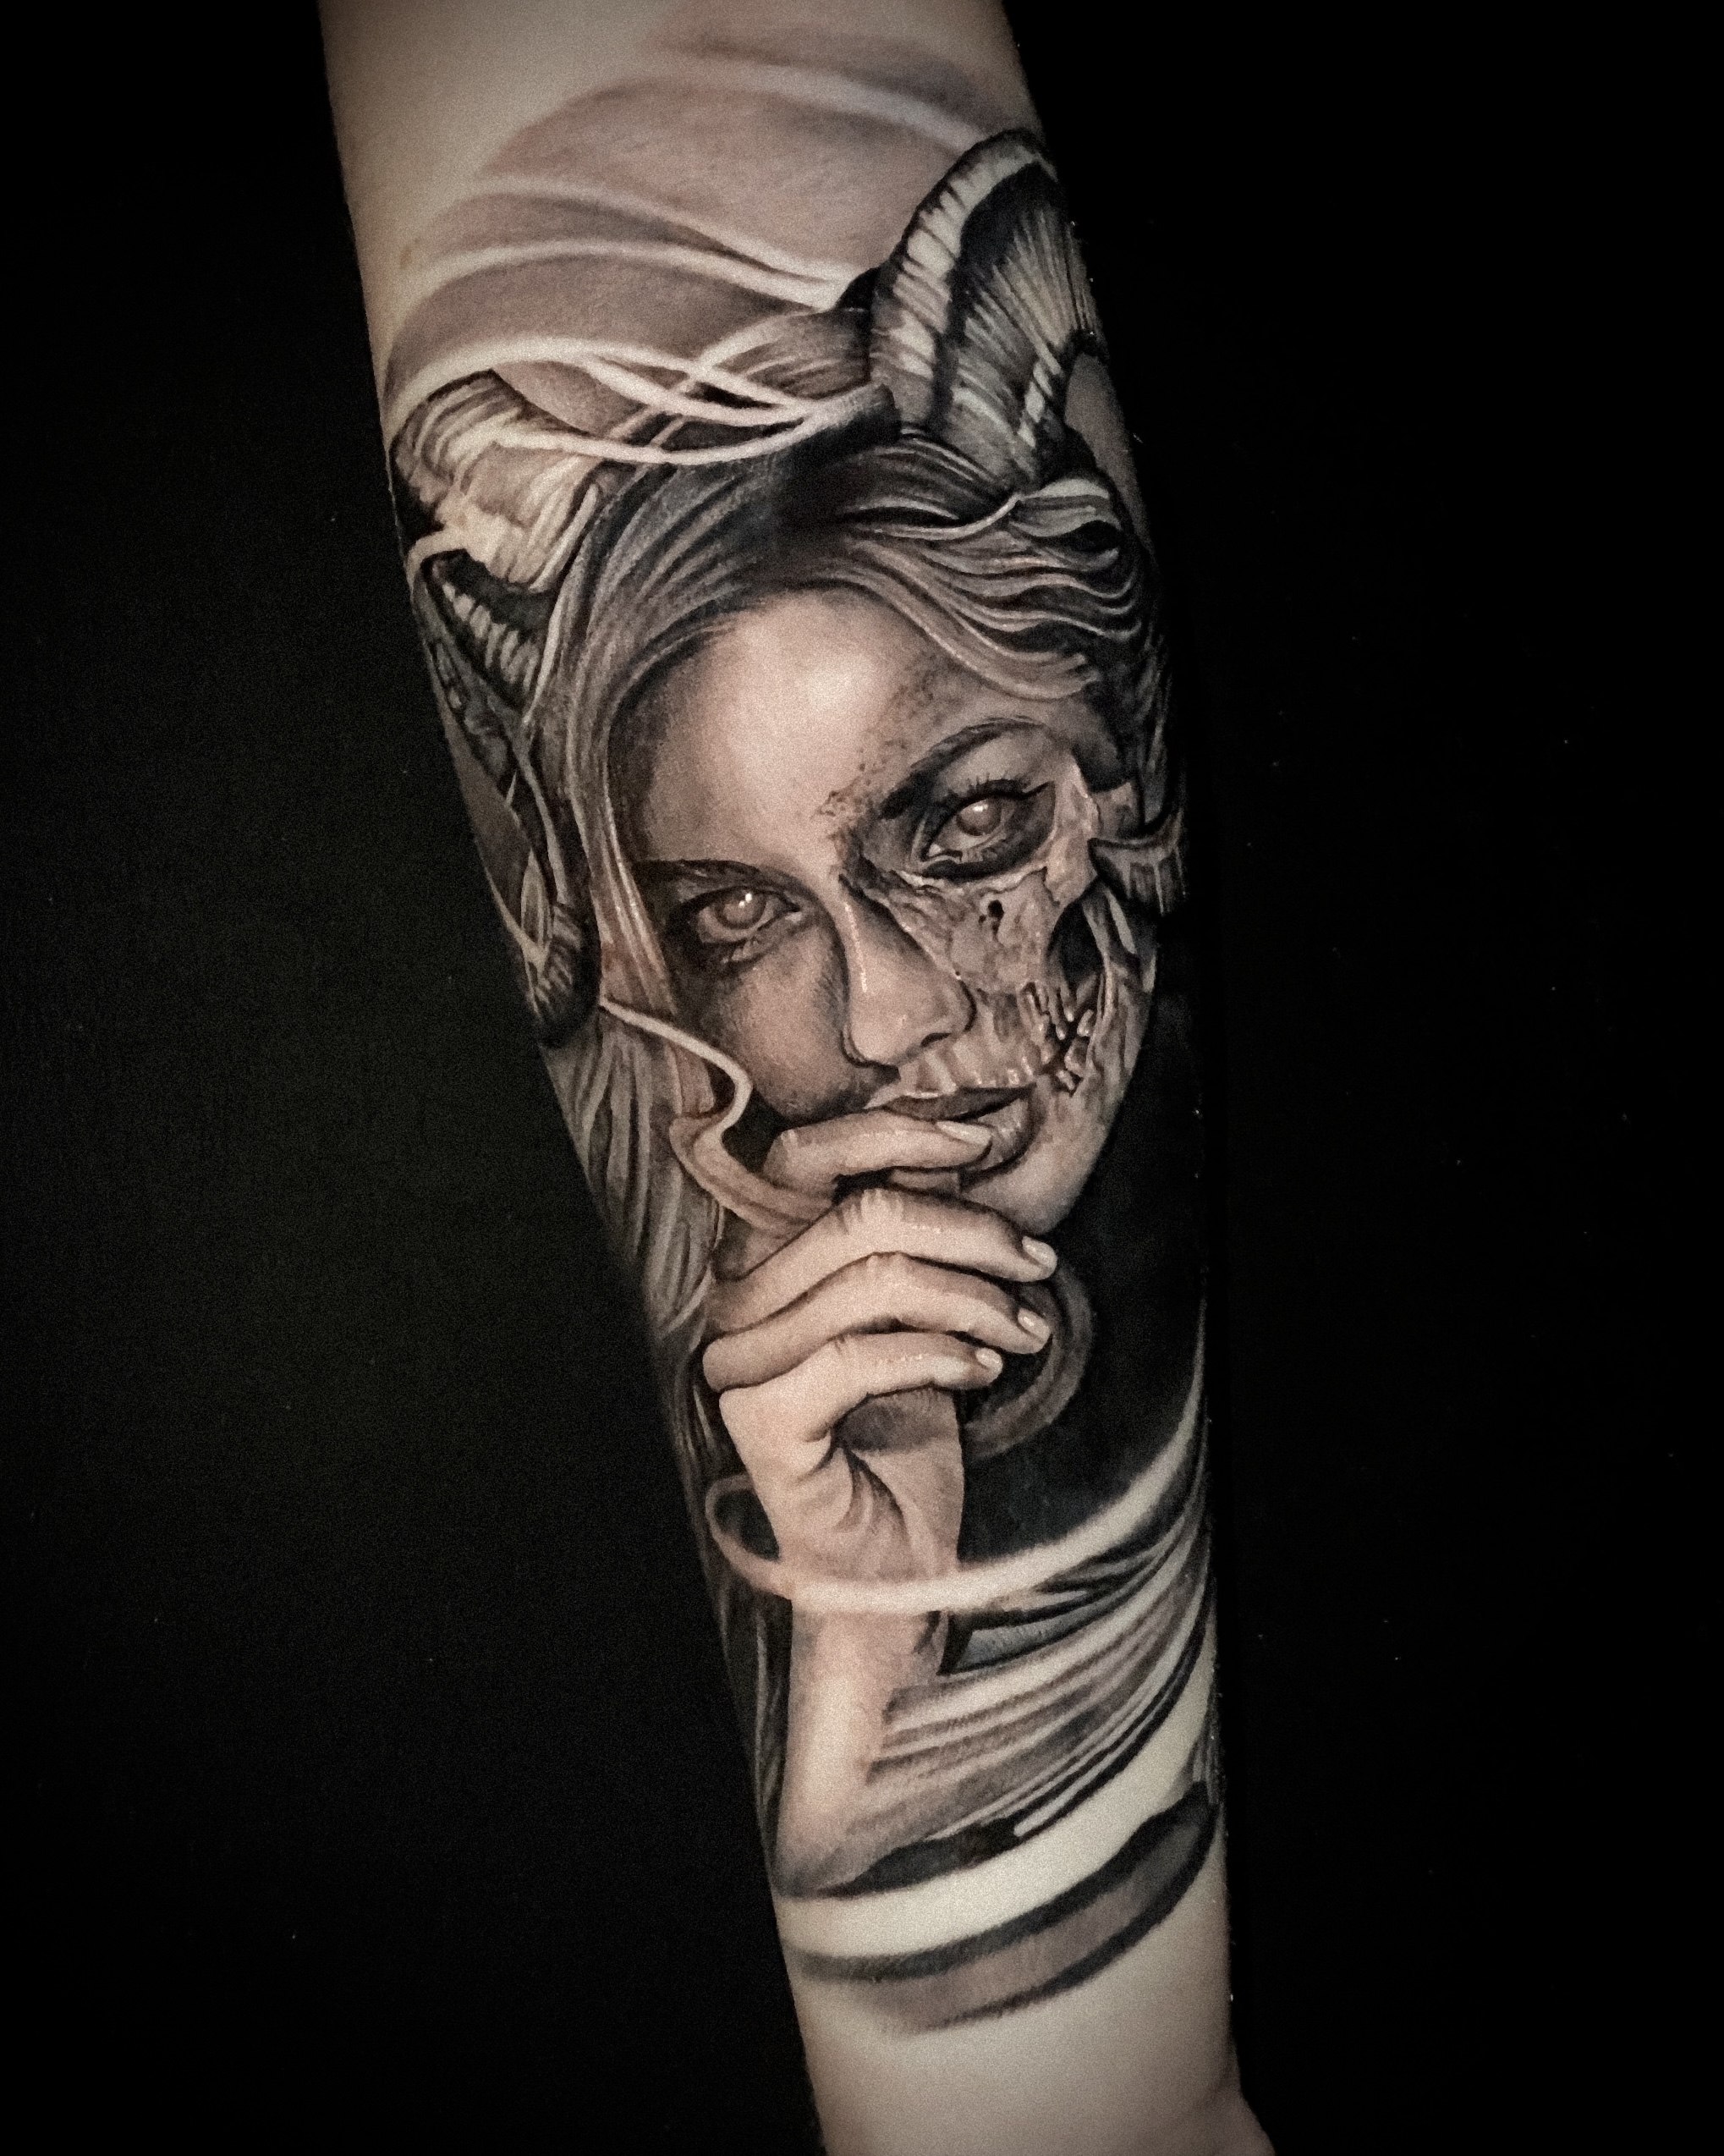 Tattoo uploaded by Alexei Mikhailov  Tattoo skull in a realistic style by  tattoo artist Alexei Mikhailov Black and white tattoo tattoorealistic  tattoorealism tattoos tattooskull skulltattoo tattoorealist tattooart  tatuajes tatuaze  Tattoodo